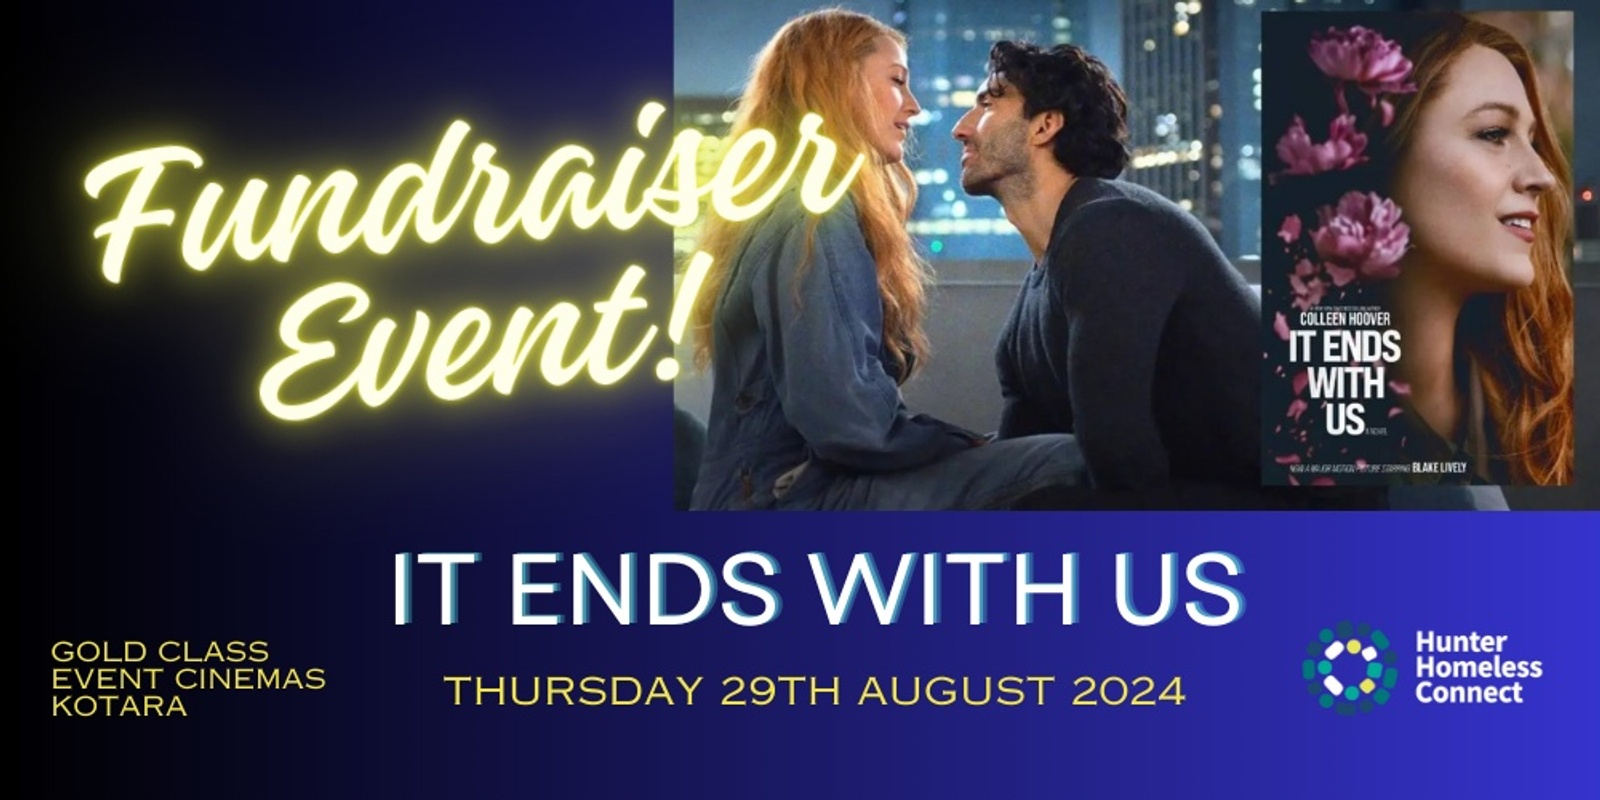 Banner image for It Ends With Us - Hunter Homeless Connect Fundraiser